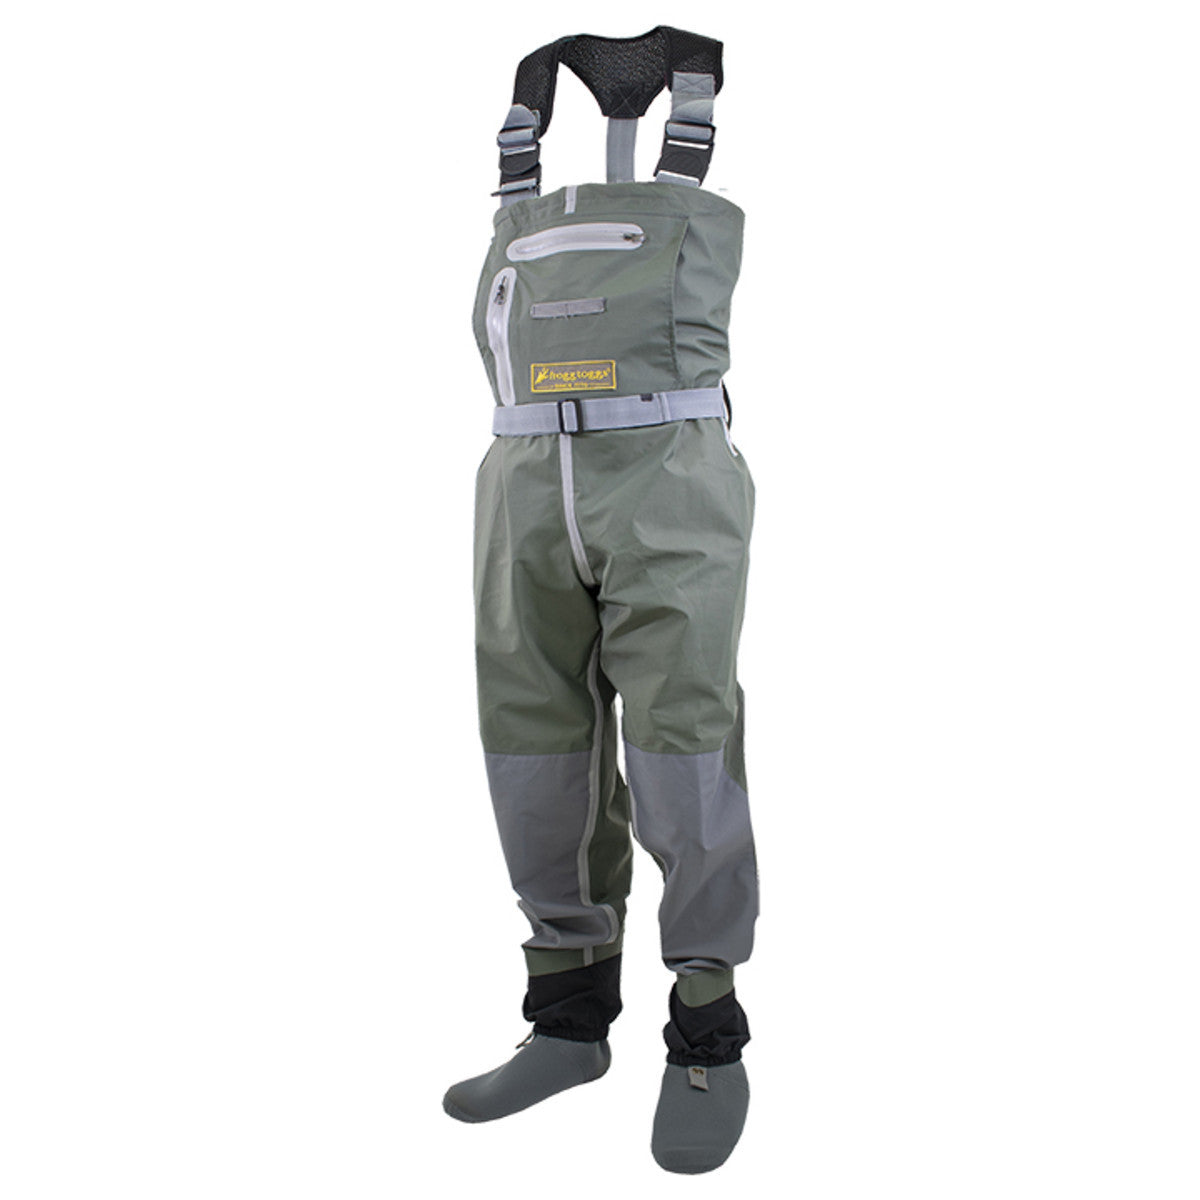 frogg toggs Pilot II Breathable Stockingfoot Guide Wading Pants for Men